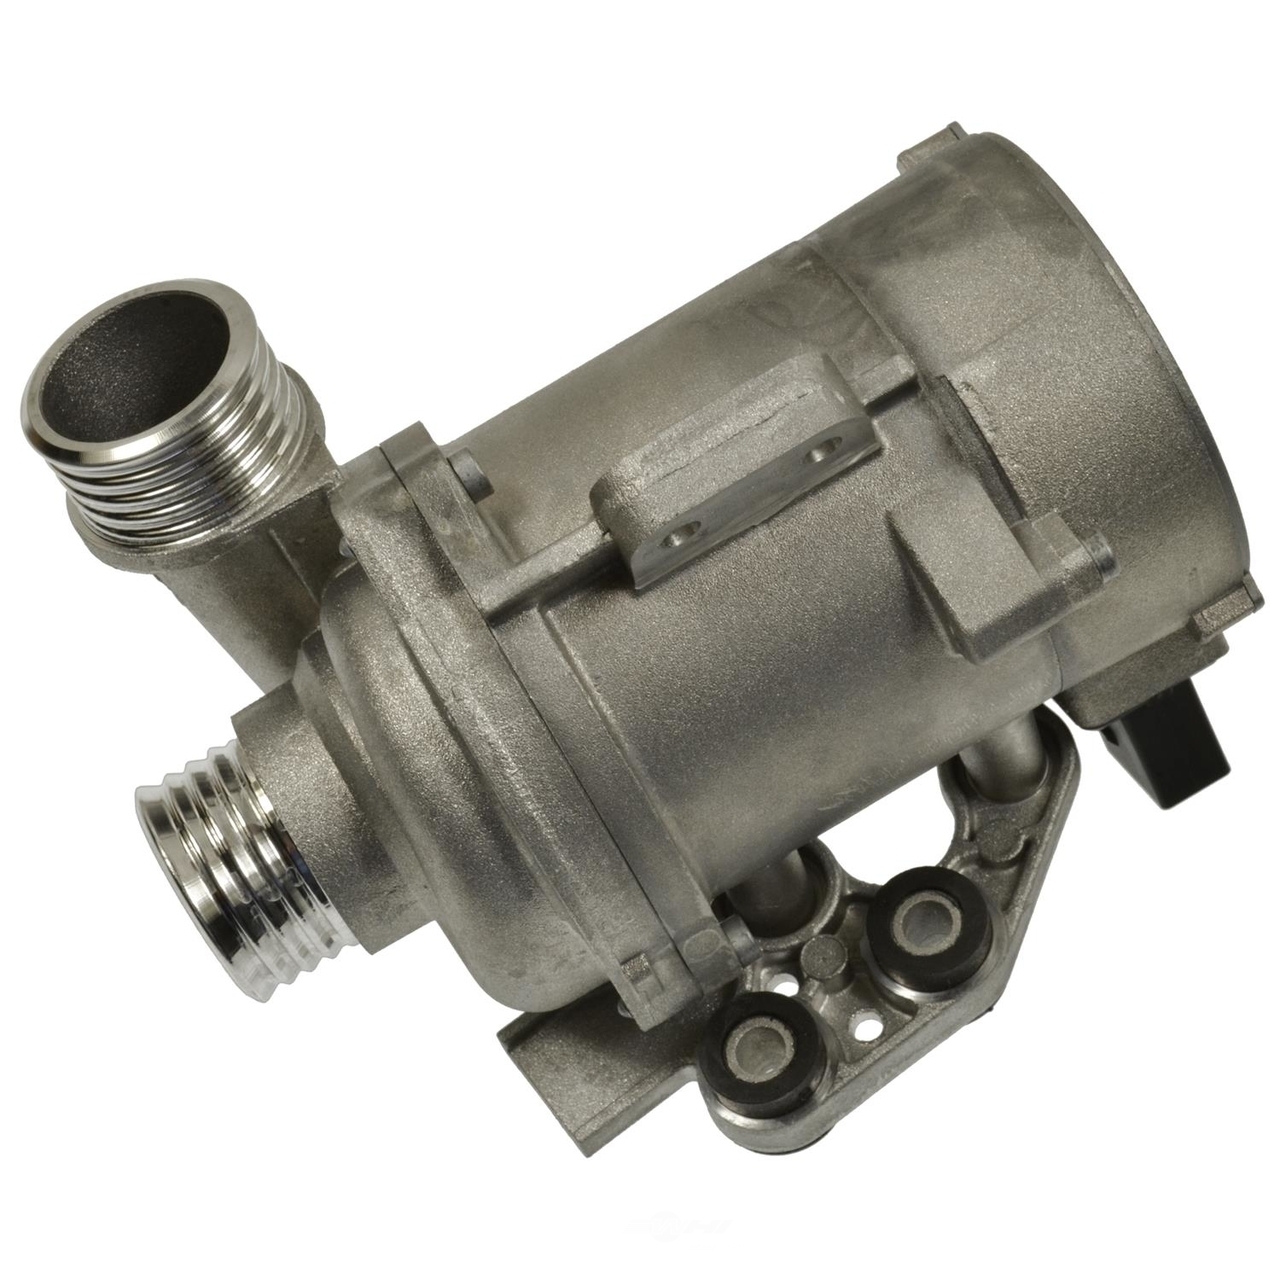 2011 BMW X3 Electric Engine Water Pump - Standard Motor Products